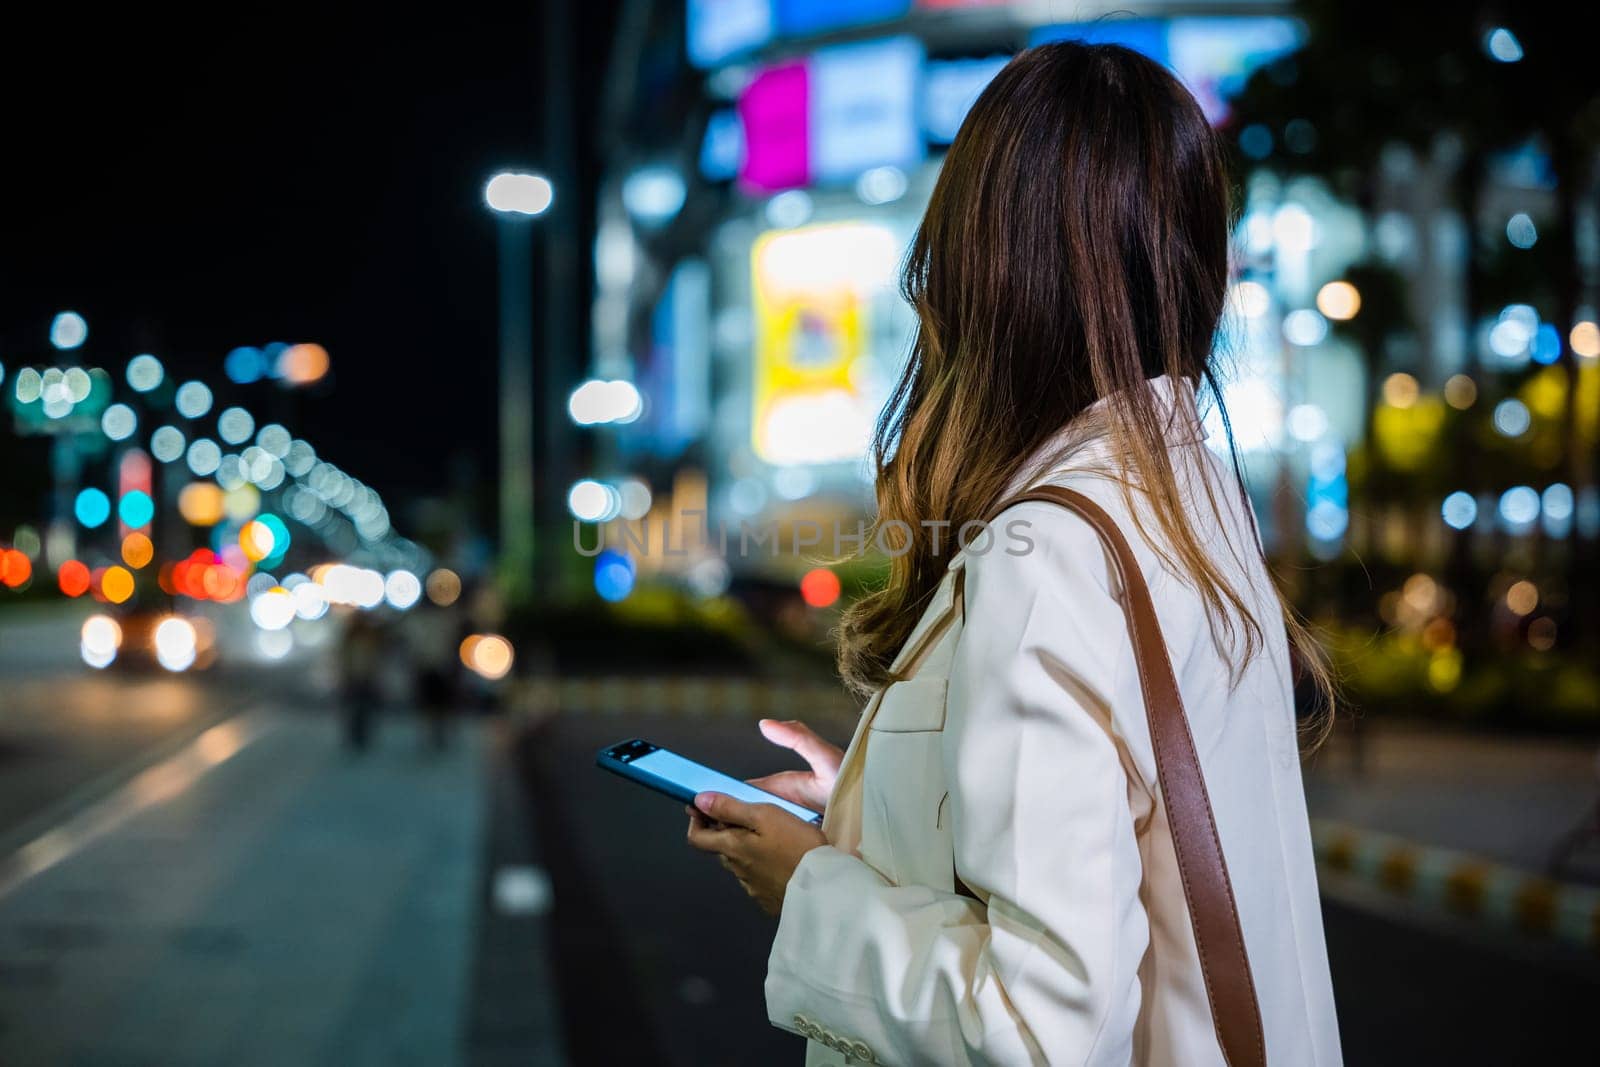 A young woman standing on the side of a city road at night, holding her cellphone and texting, with the glow of city lights in the background.